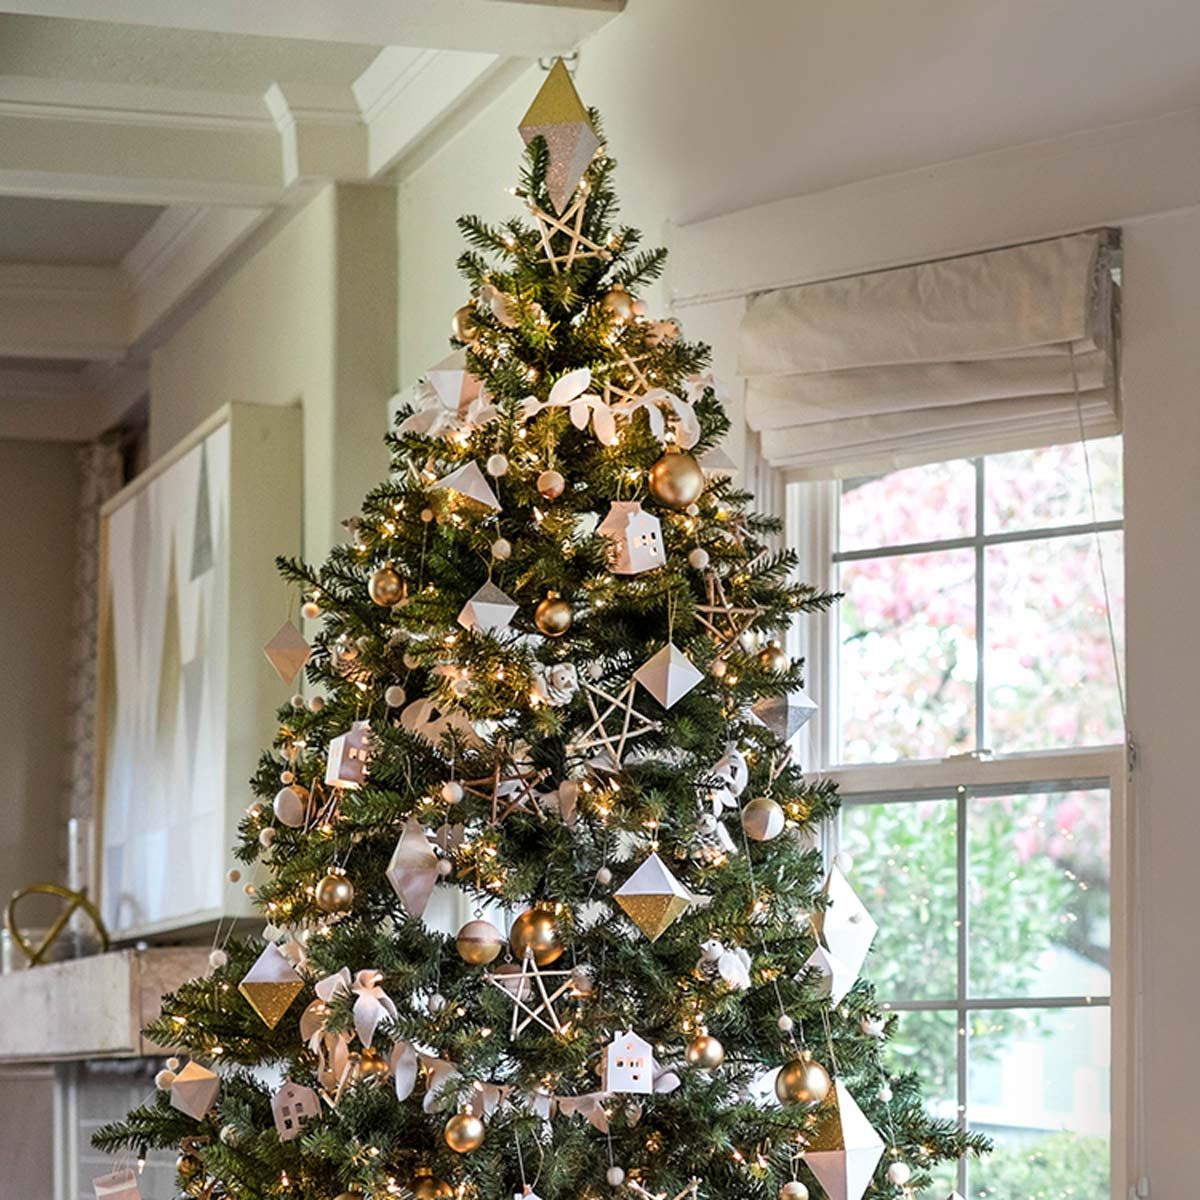 18 Alternative Christmas Tree Wall Ideas For Small Spaces - Tiny Partments